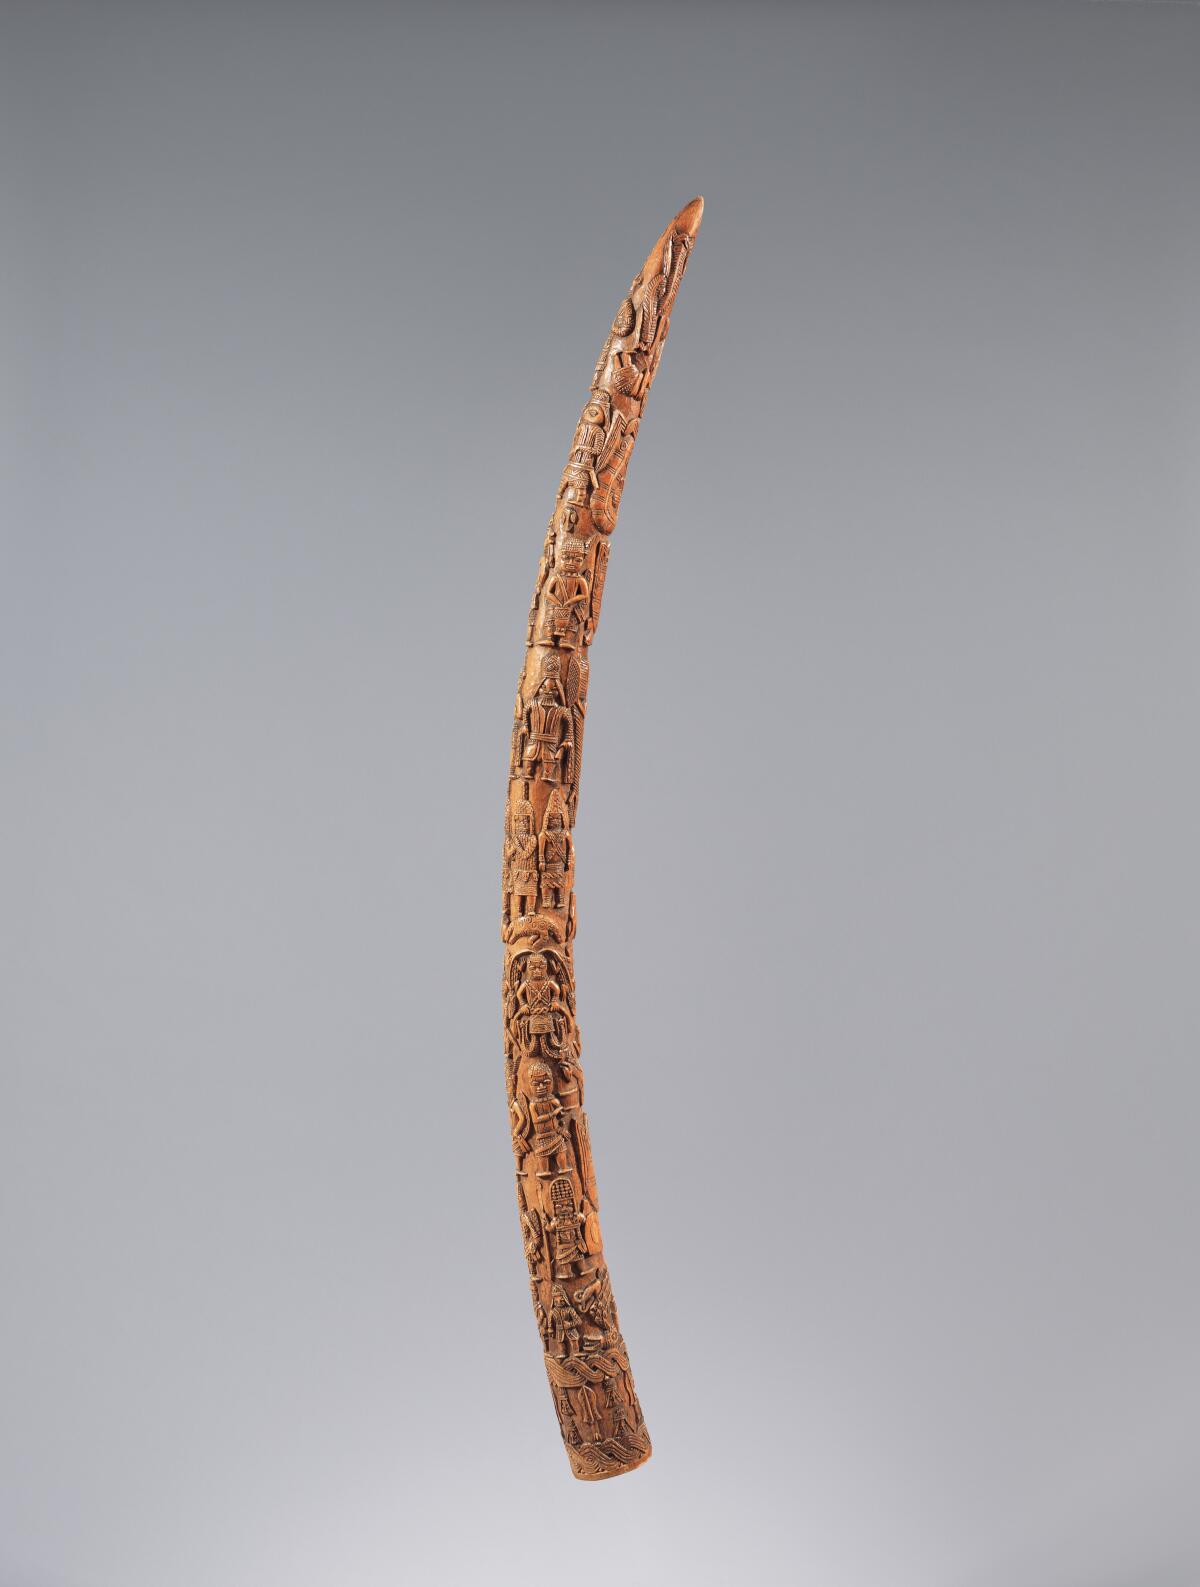 A tusk with carvings all along its length